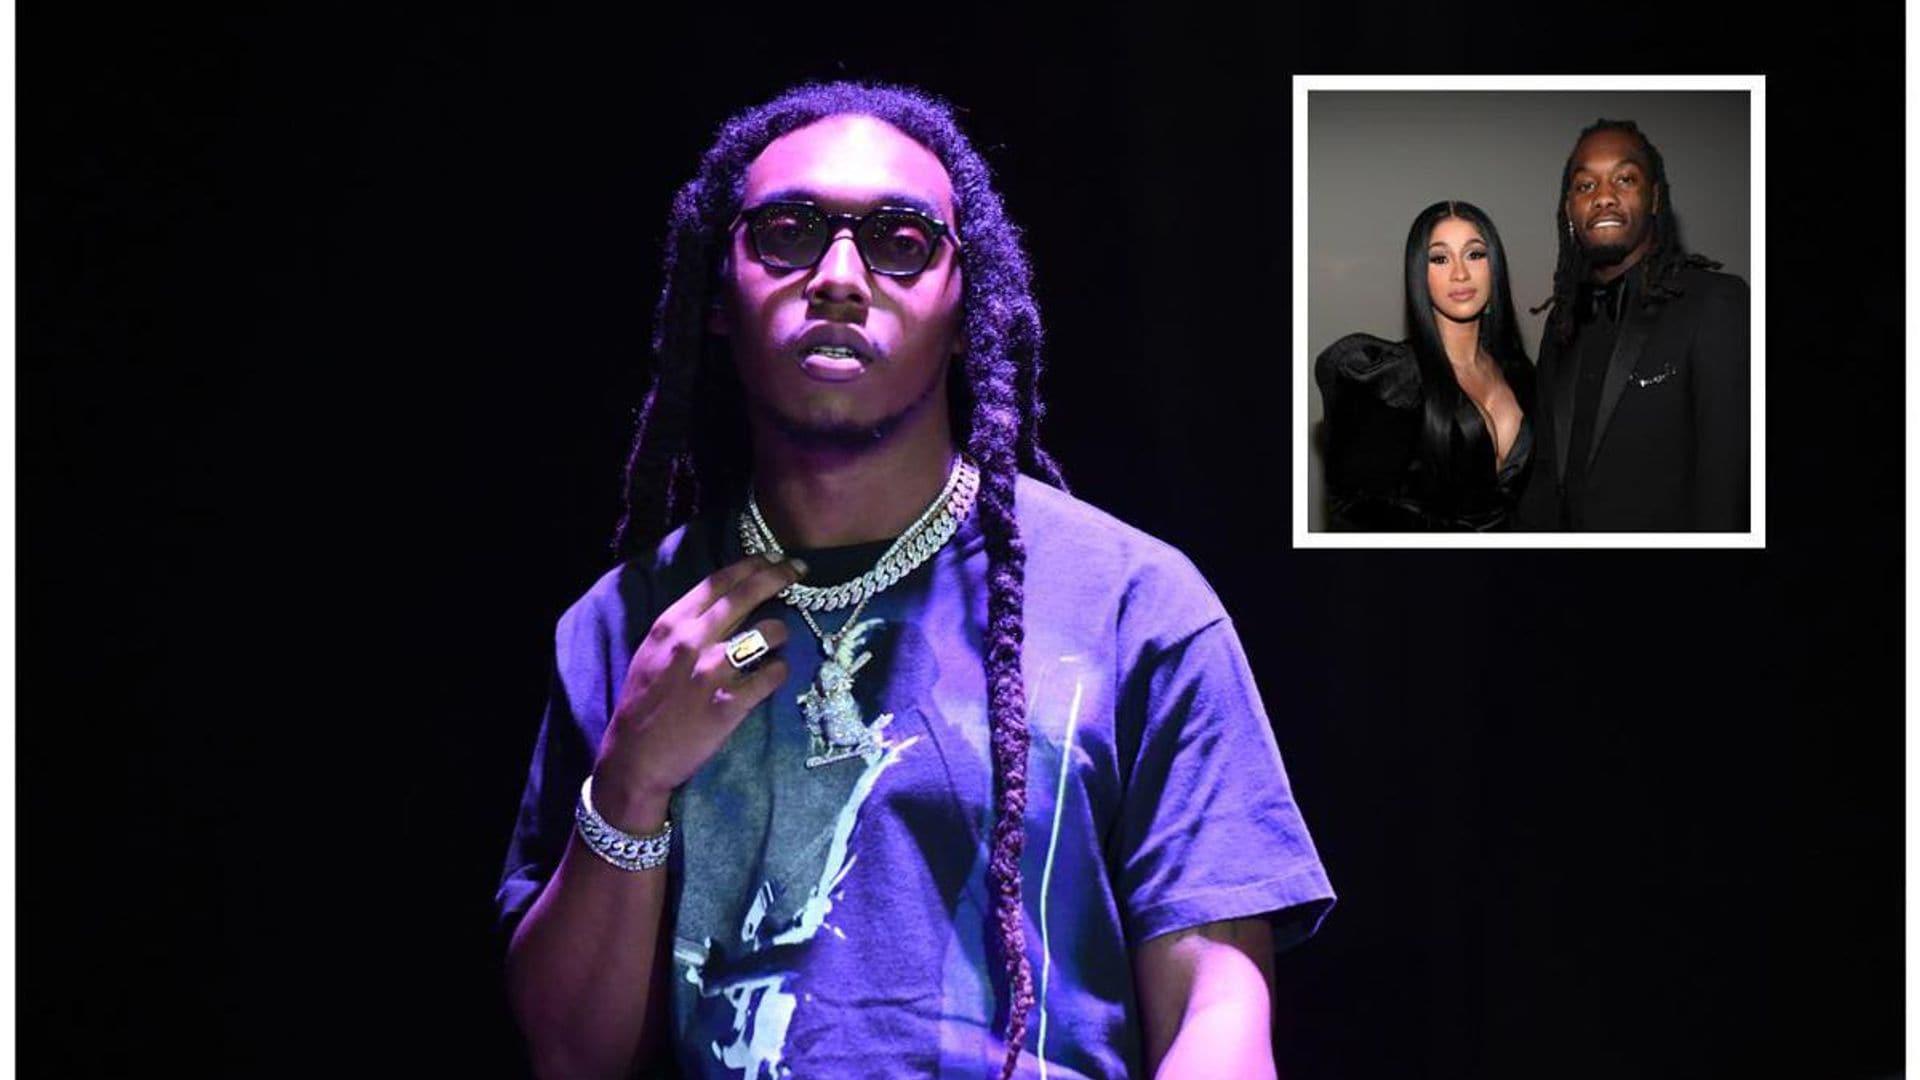 Cardi B and Offset react to Takeoff’s tragic death